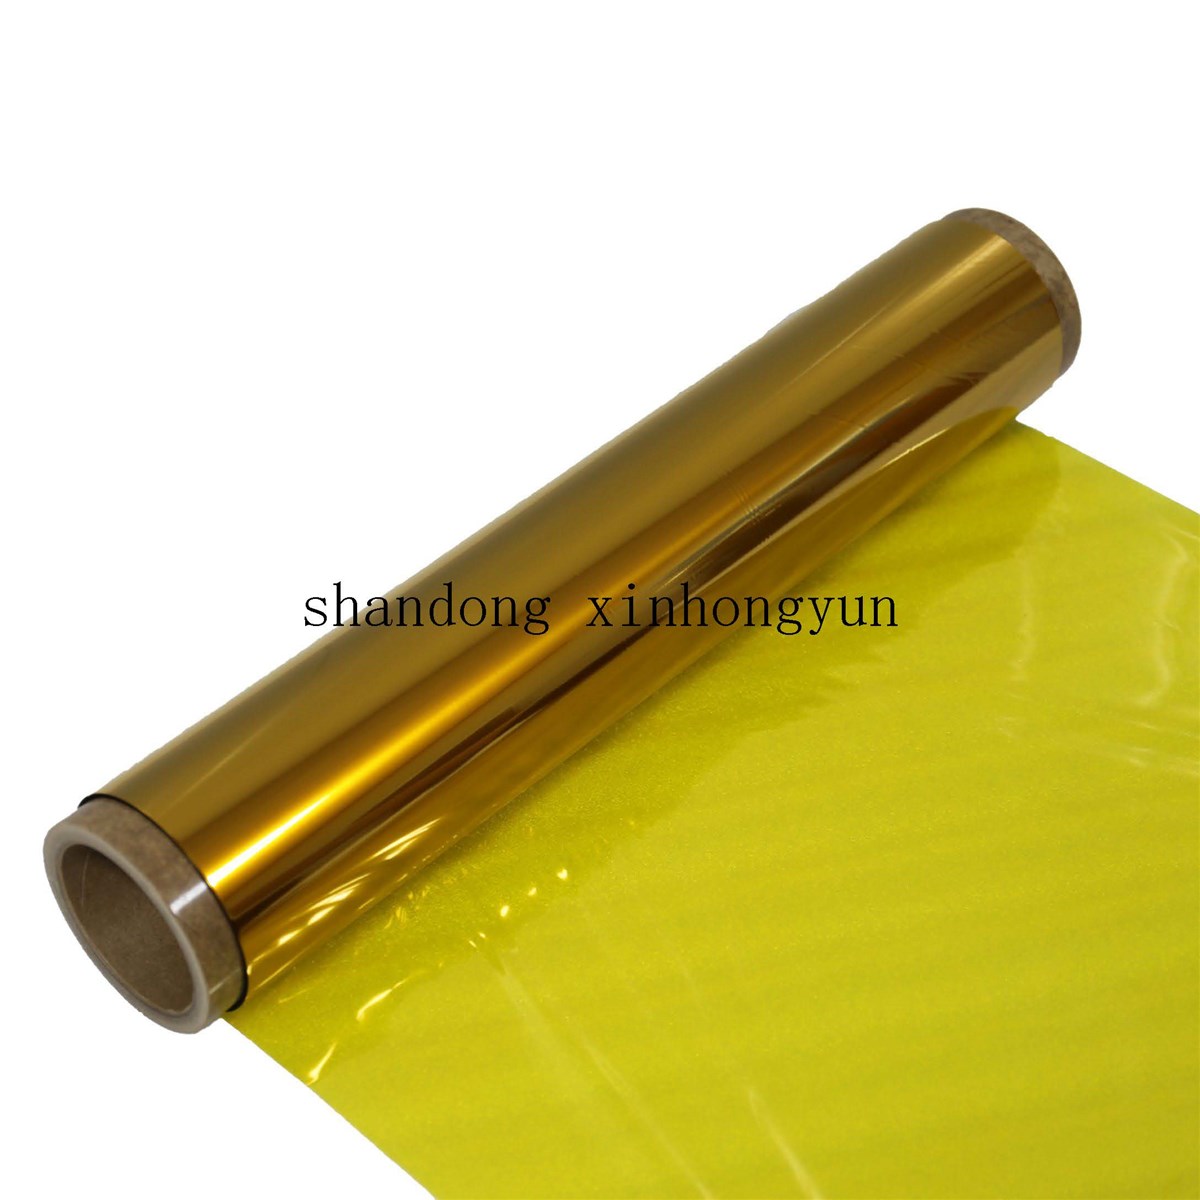 Kapton Film for Electrical Insulation